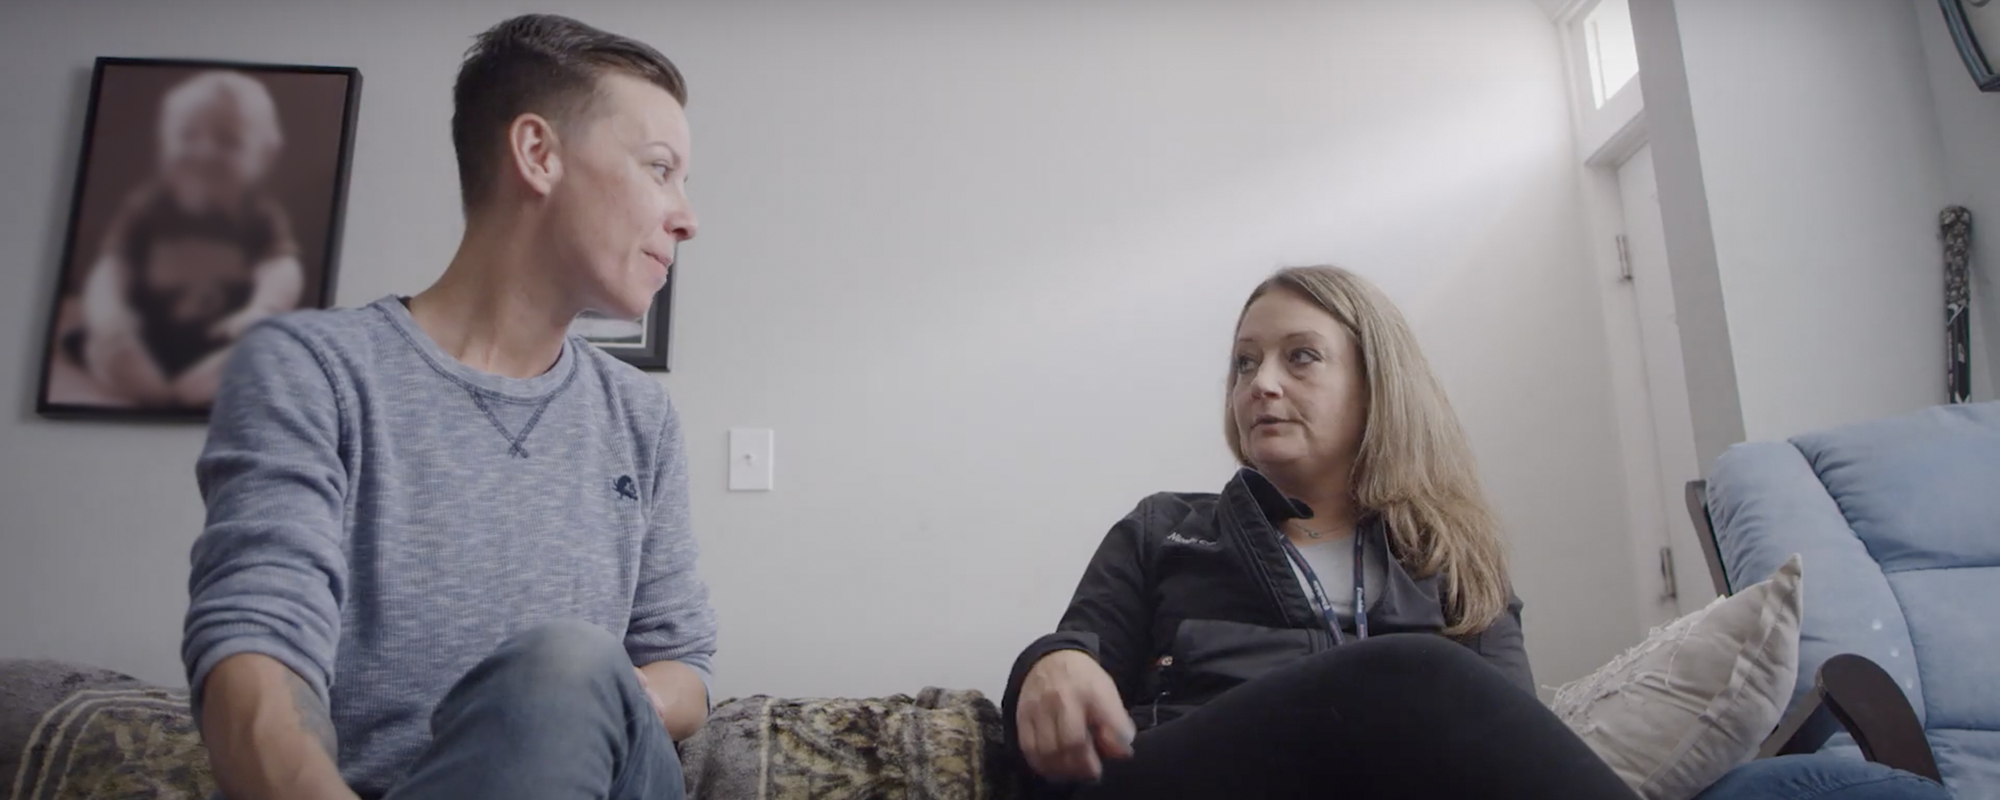 CORE participant speaks with a recovery specialist at home